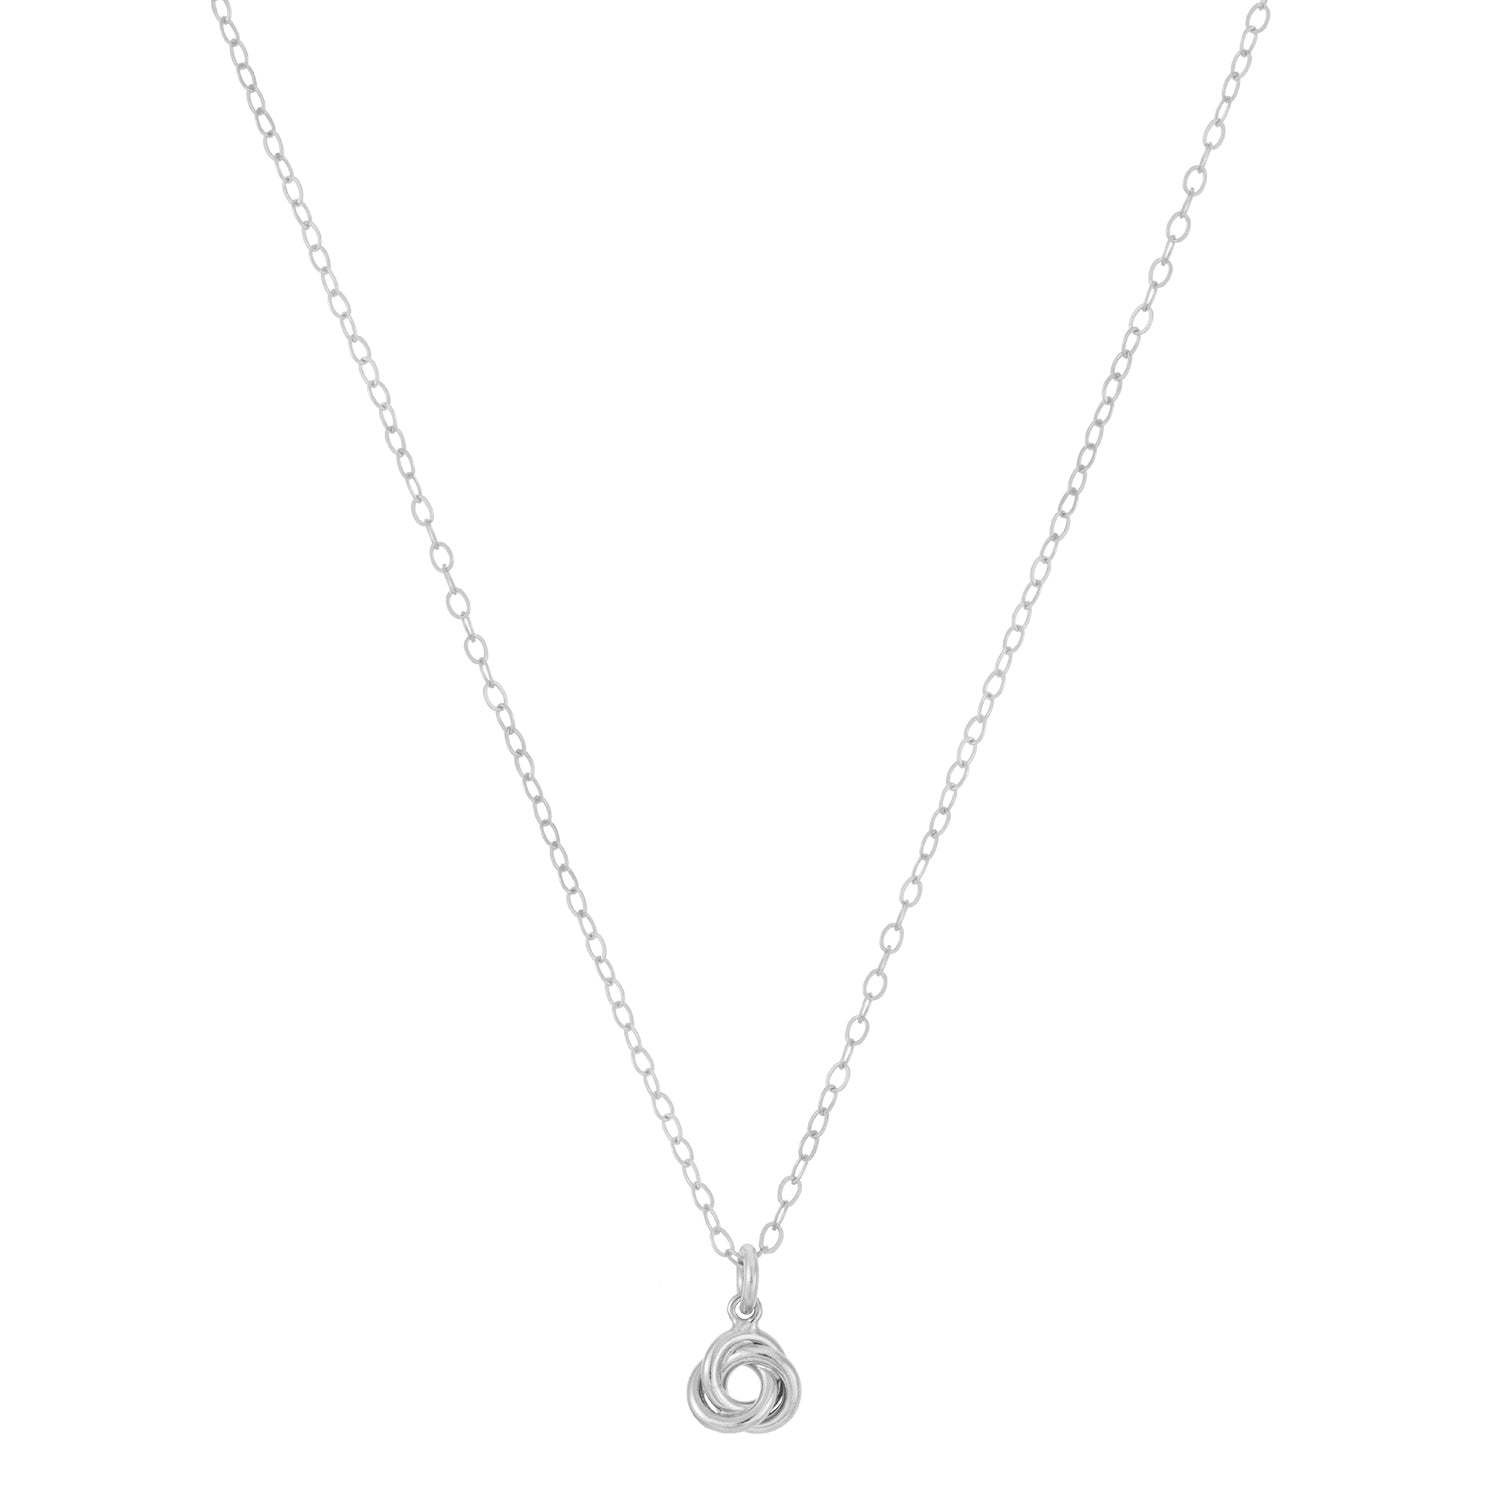 Amazon.com : Love Knot Rose Gold Necklace Nonna Love Knot Necklace, Gift  Idea for Grandmother from Granddaughter, Nonna Gift from Grandson : Sports  & Outdoors